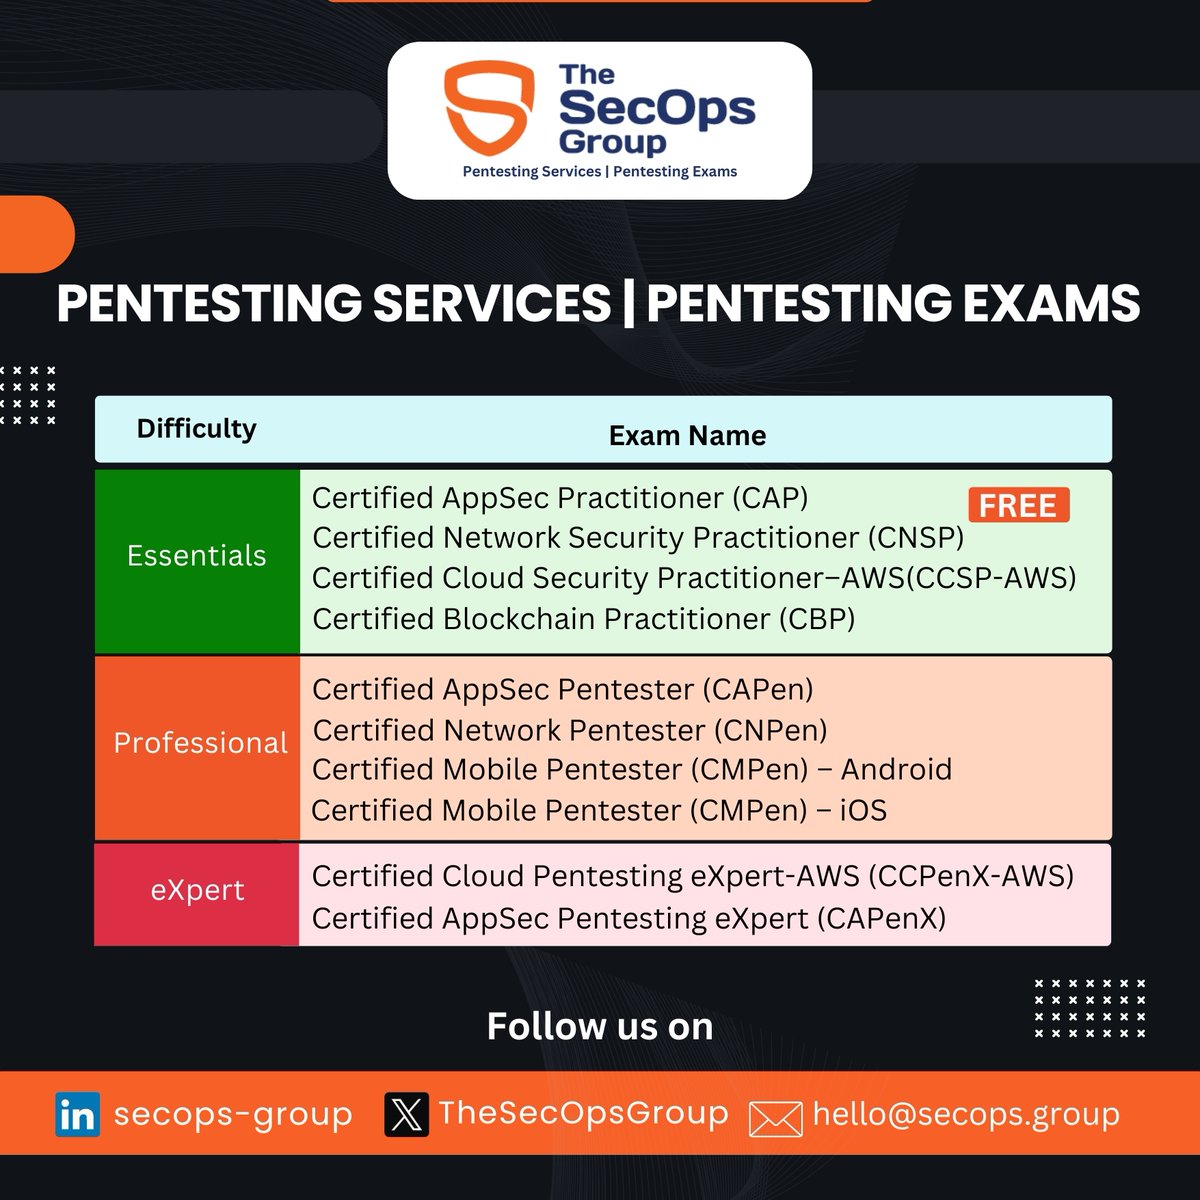 🎖️ FREE Certified Network Security Practitioner (CNSP) Exam!🎖️

**No discount code needed**

Here's how to claim your offer:
1️⃣ Like and share this post.
2️⃣ Fill out this Google form: 📝docs.google.com/forms/d/e/1FAI…
3️⃣ After submitting the form, we will email you the exam details. 💯